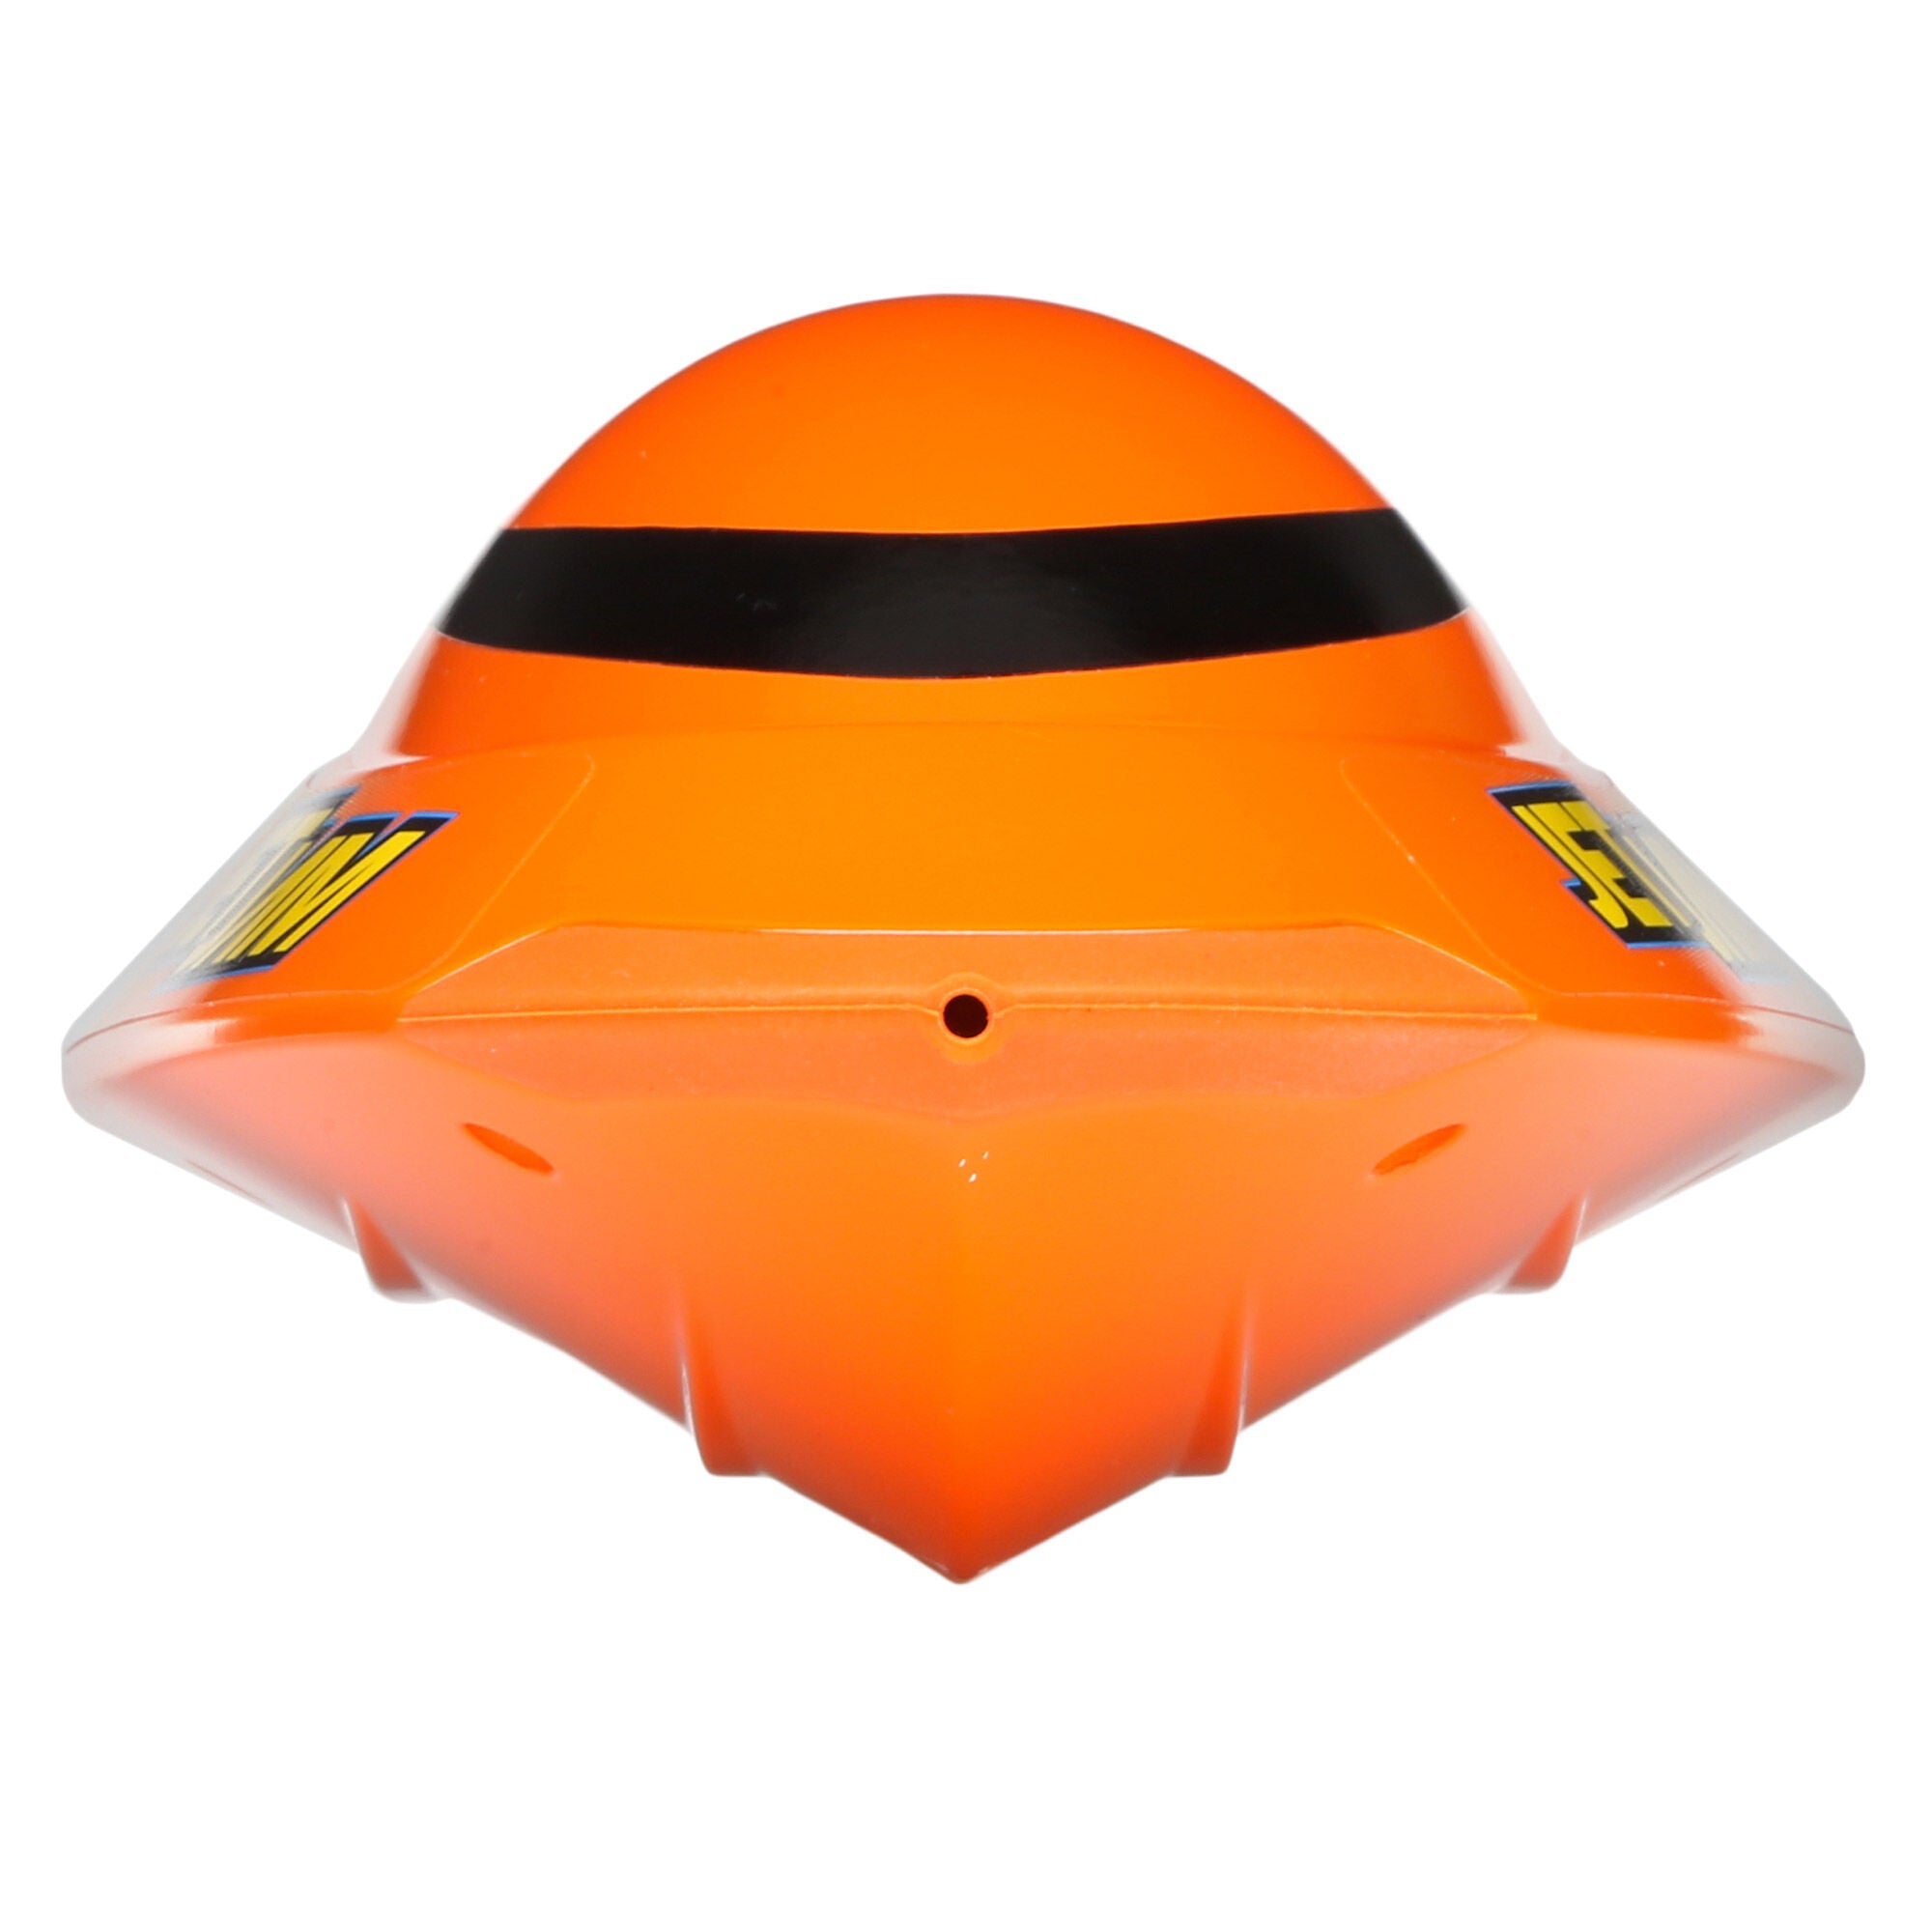 Pro Boat Jet Jam V2 12" Self-Righting Pool Racer Brushed RTR (Varios colores)